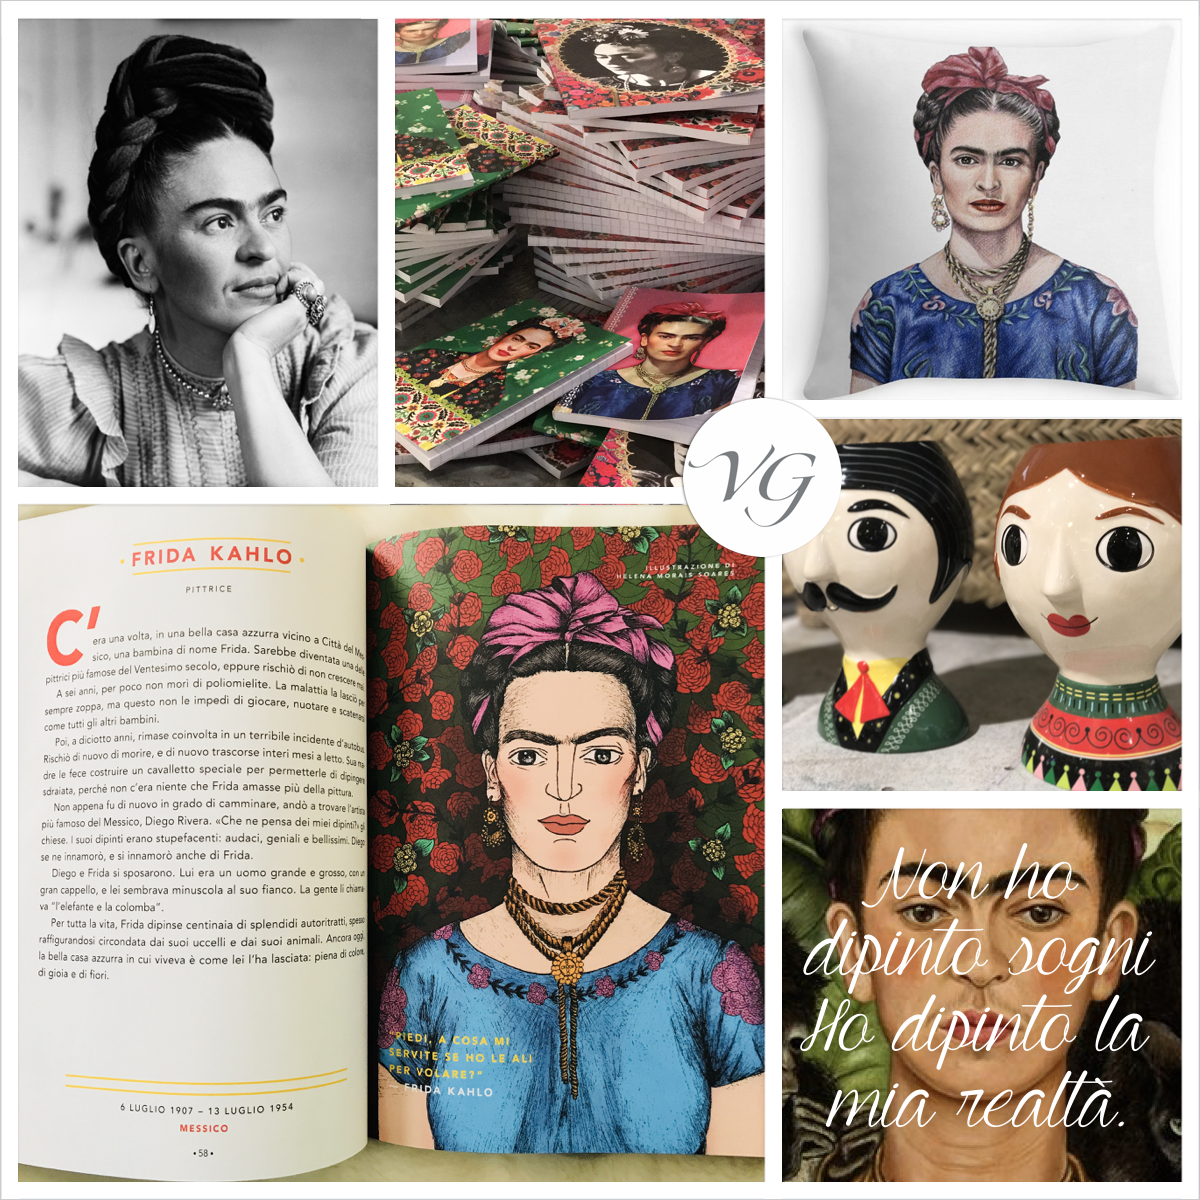 How To Be More Like Frida Kahlo As Told By Frida Kahlo  HuffPost  Entertainment